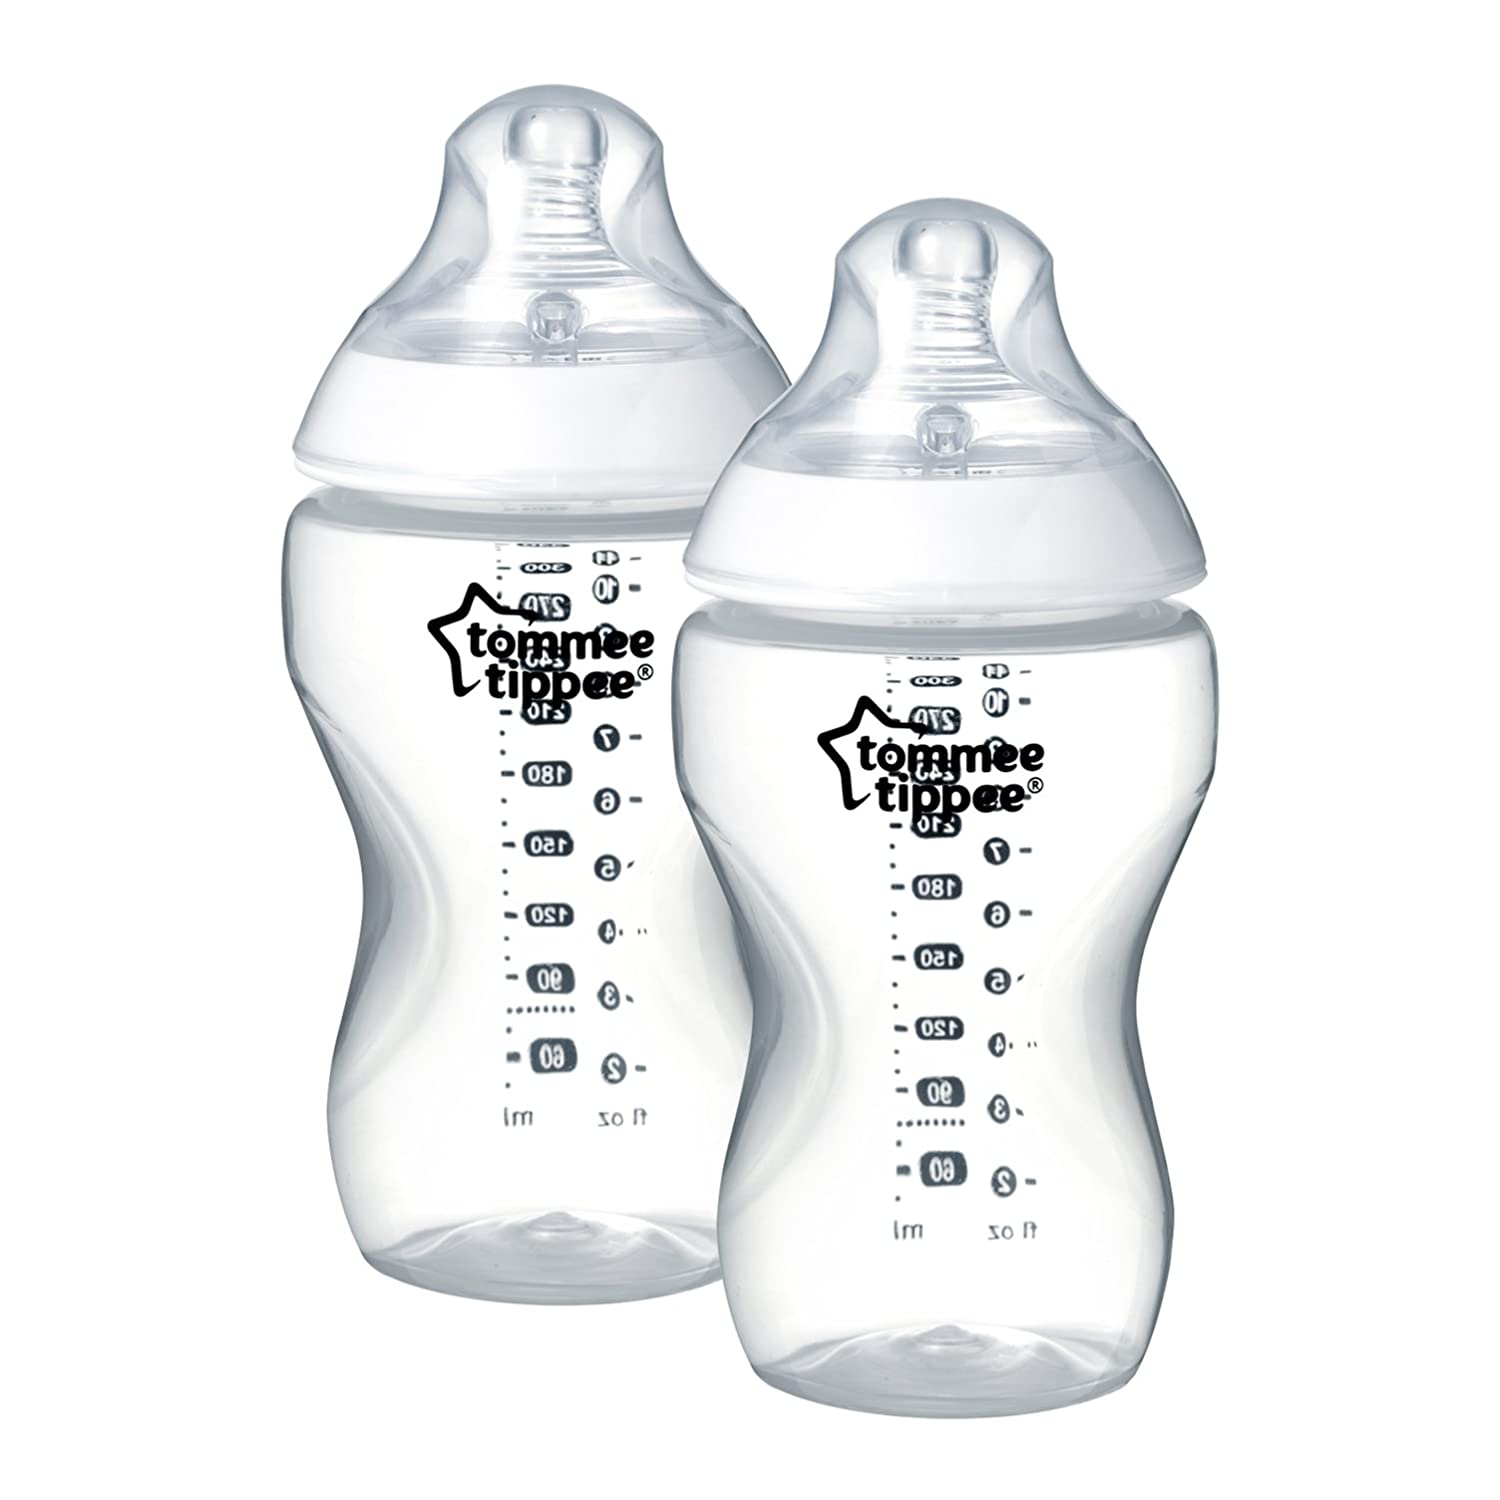 Tommee Tippee Closer to Nature Baby Bottle Anti-Colic Valve Super Soft Teat, Set of 2, 340 ml